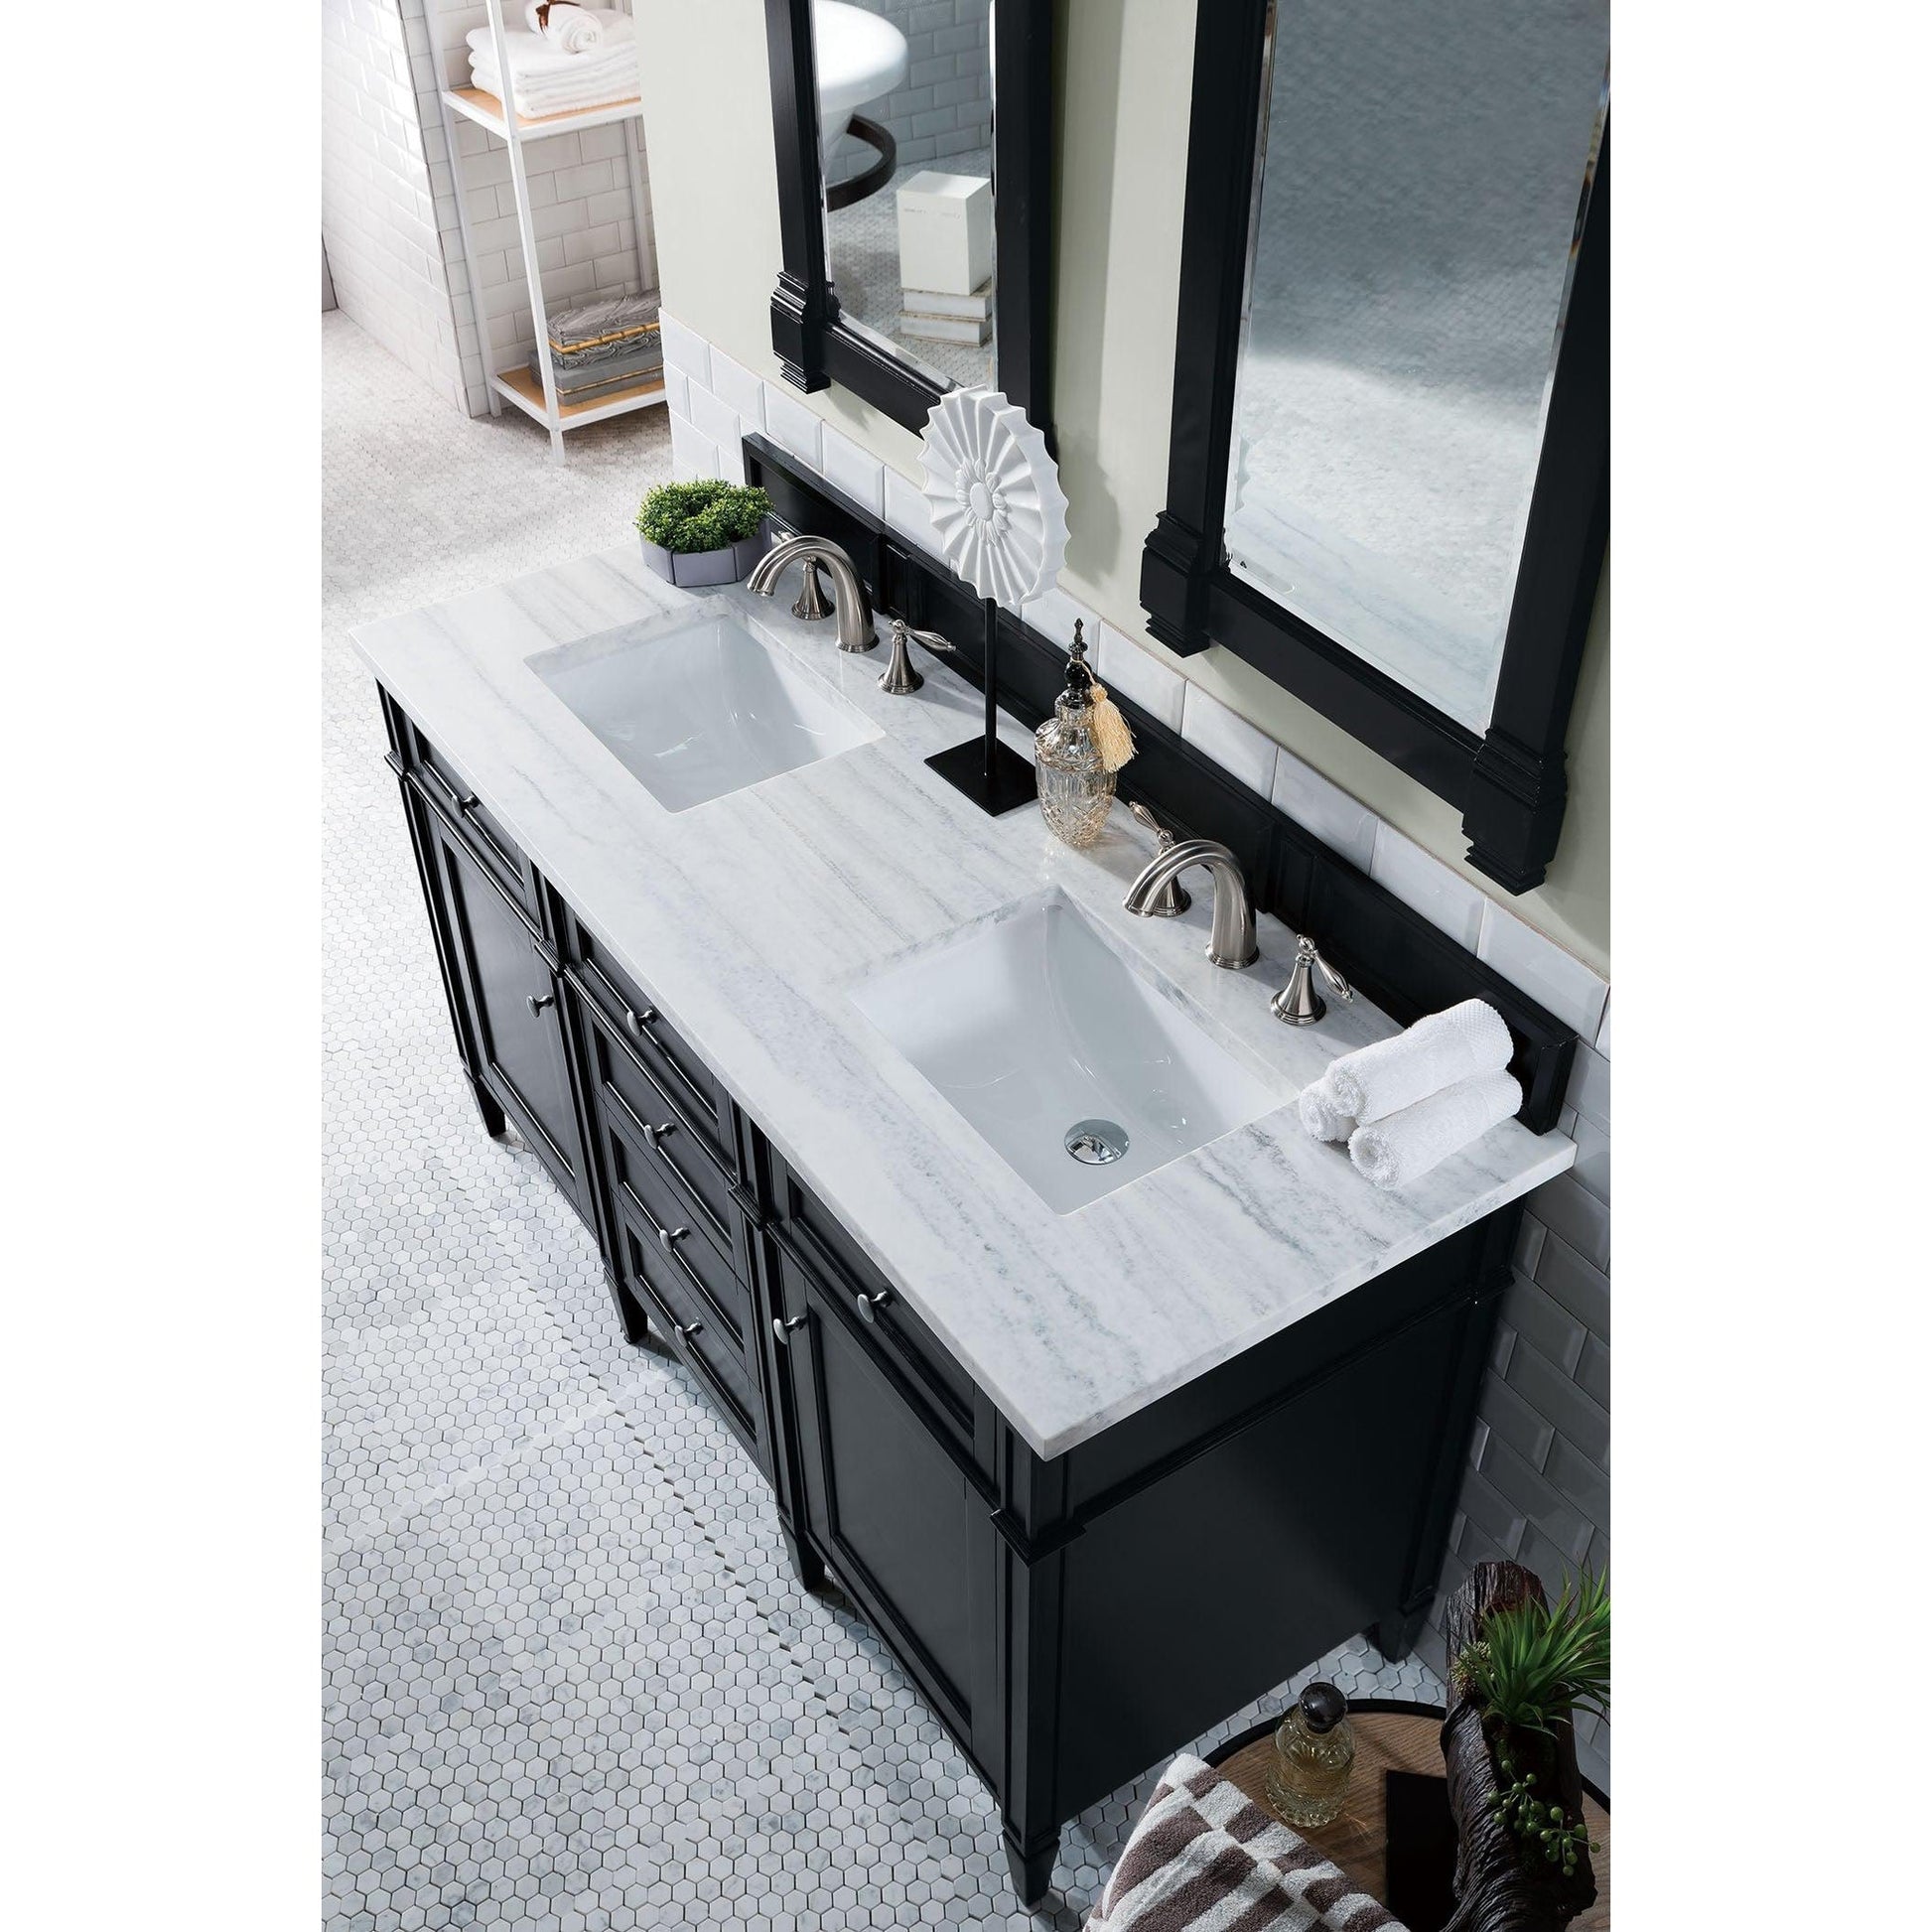 James Martin Vanities Brittany 60" Black Onyx Double Vanity With 3cm Arctic Fall Solid Surface Top